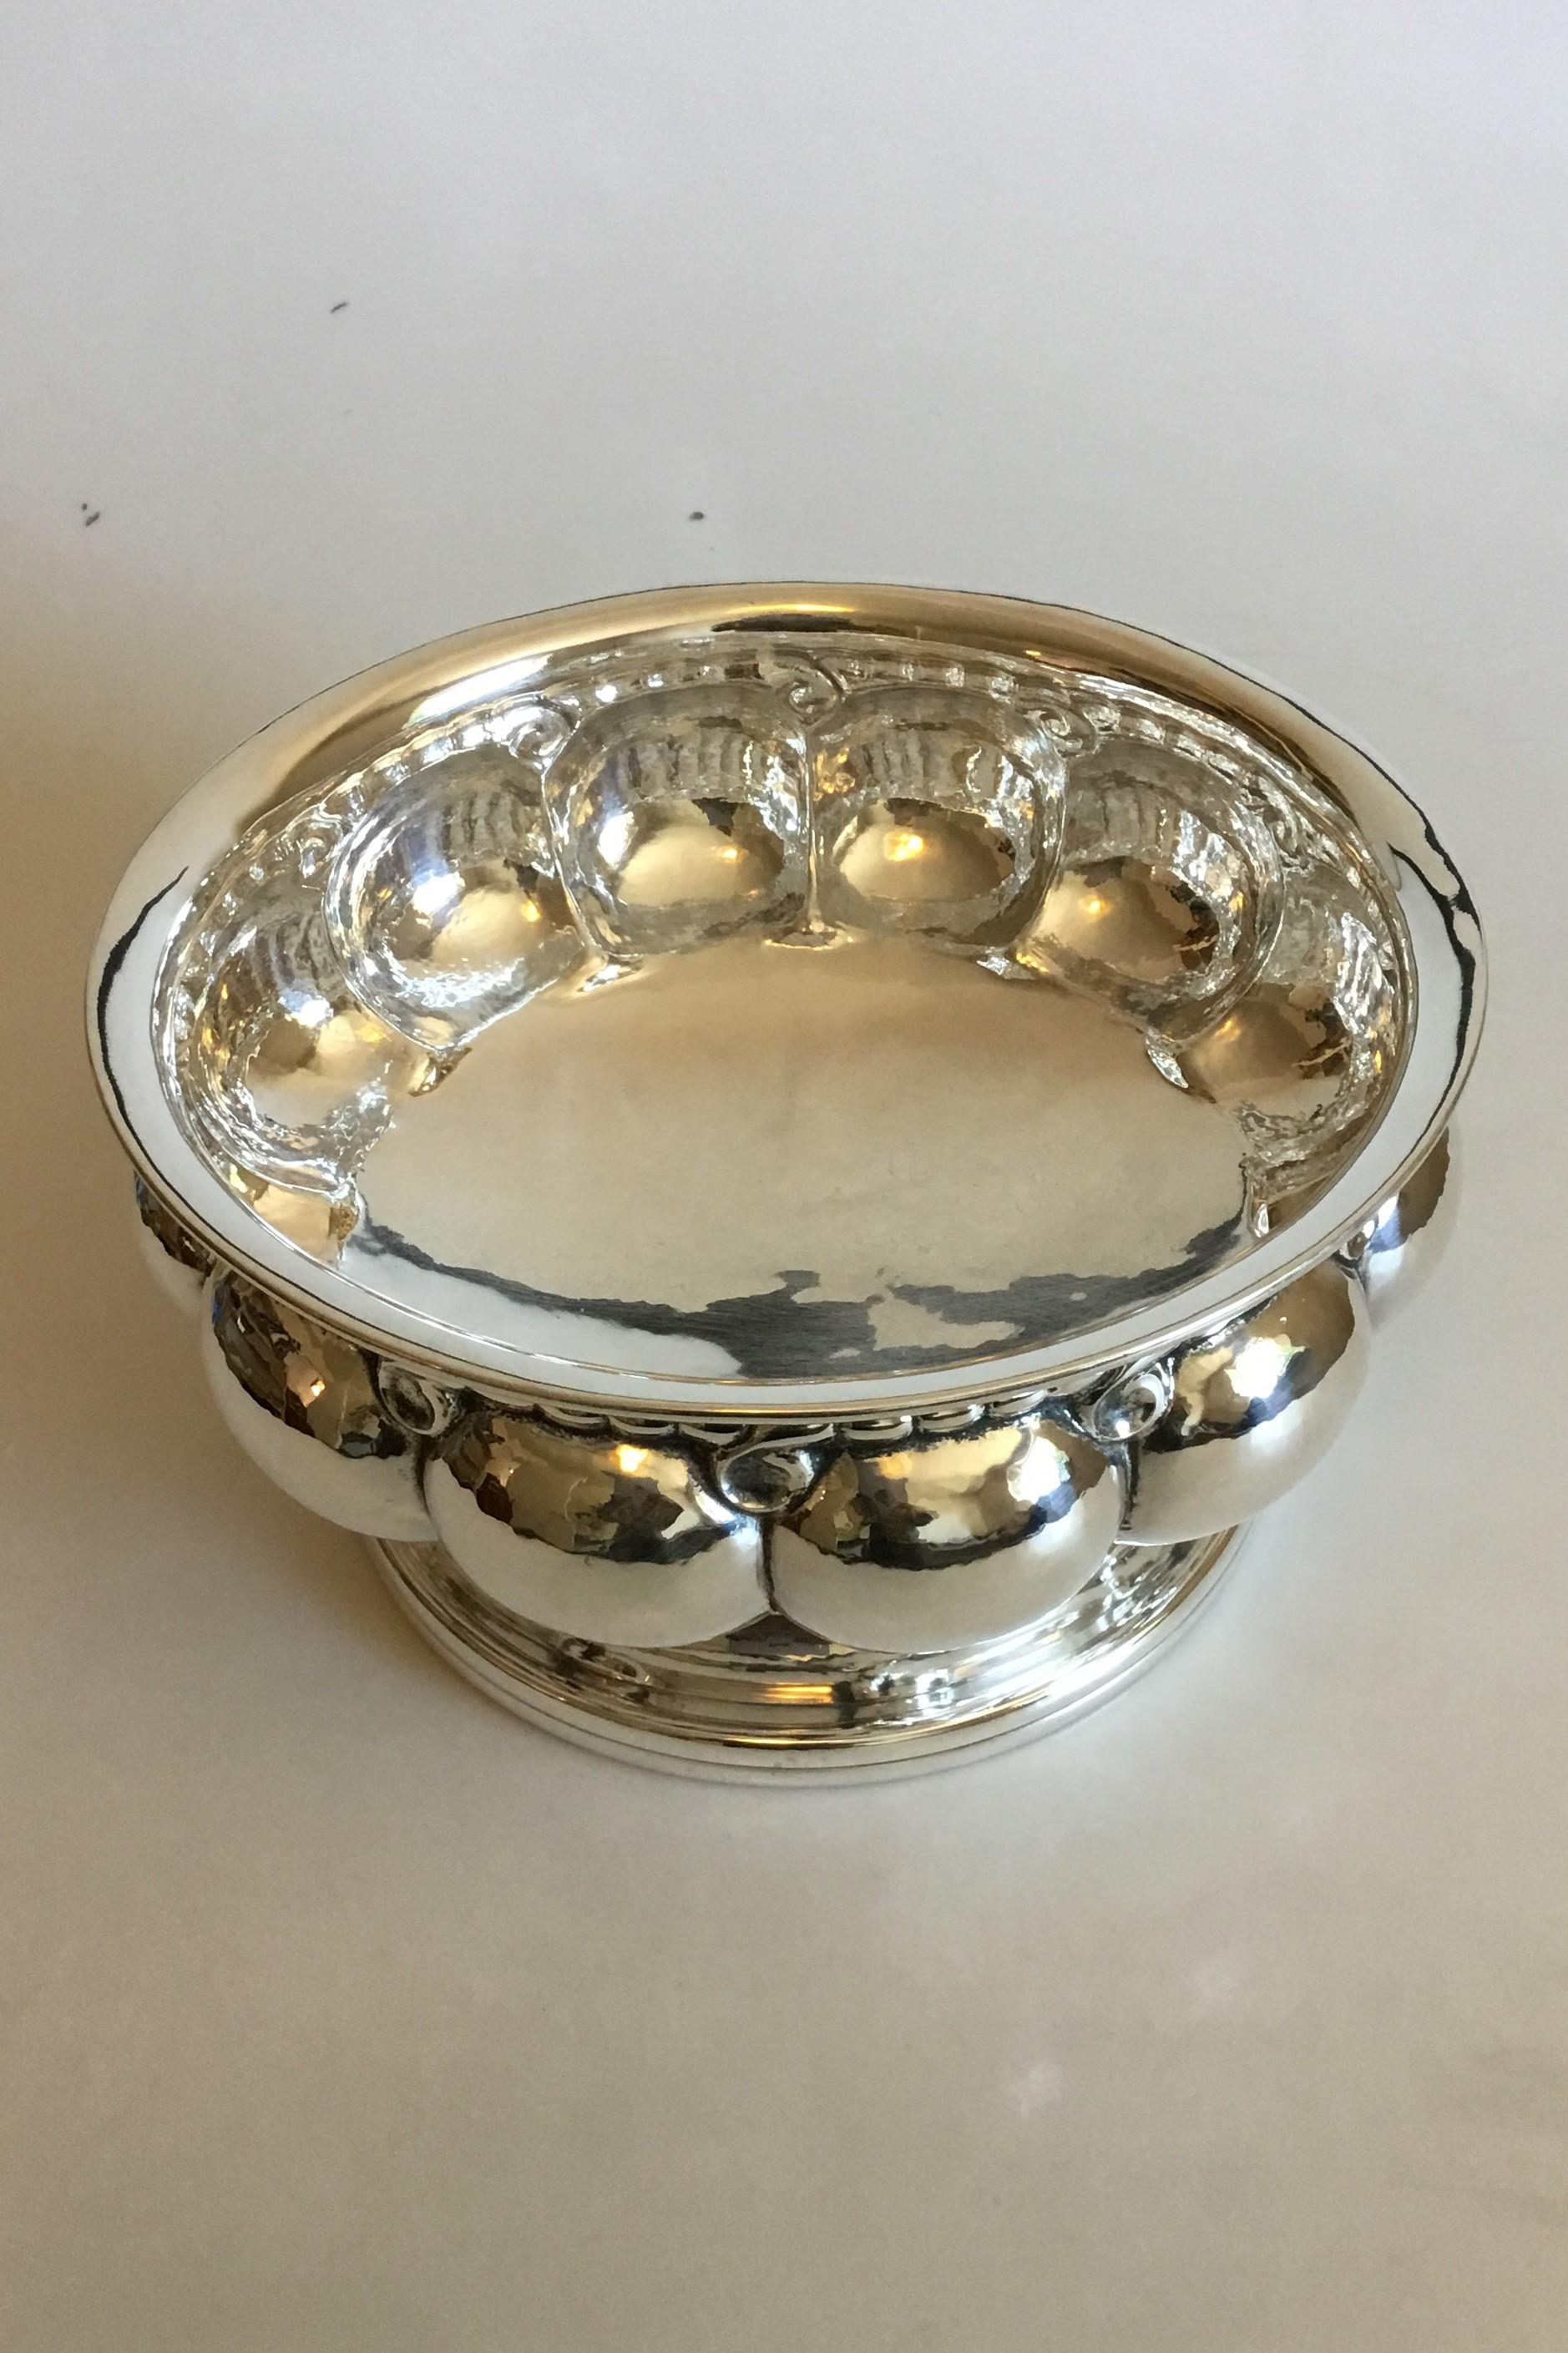 Georg Jensen sterling silver bowl No 16. Measures: 12.3 cm / 4 27/32 in. x 23.5 cm / 9 1/4 in. diameter. Weighs 783 g / 27.60 oz.
With import marks for London, 1926.